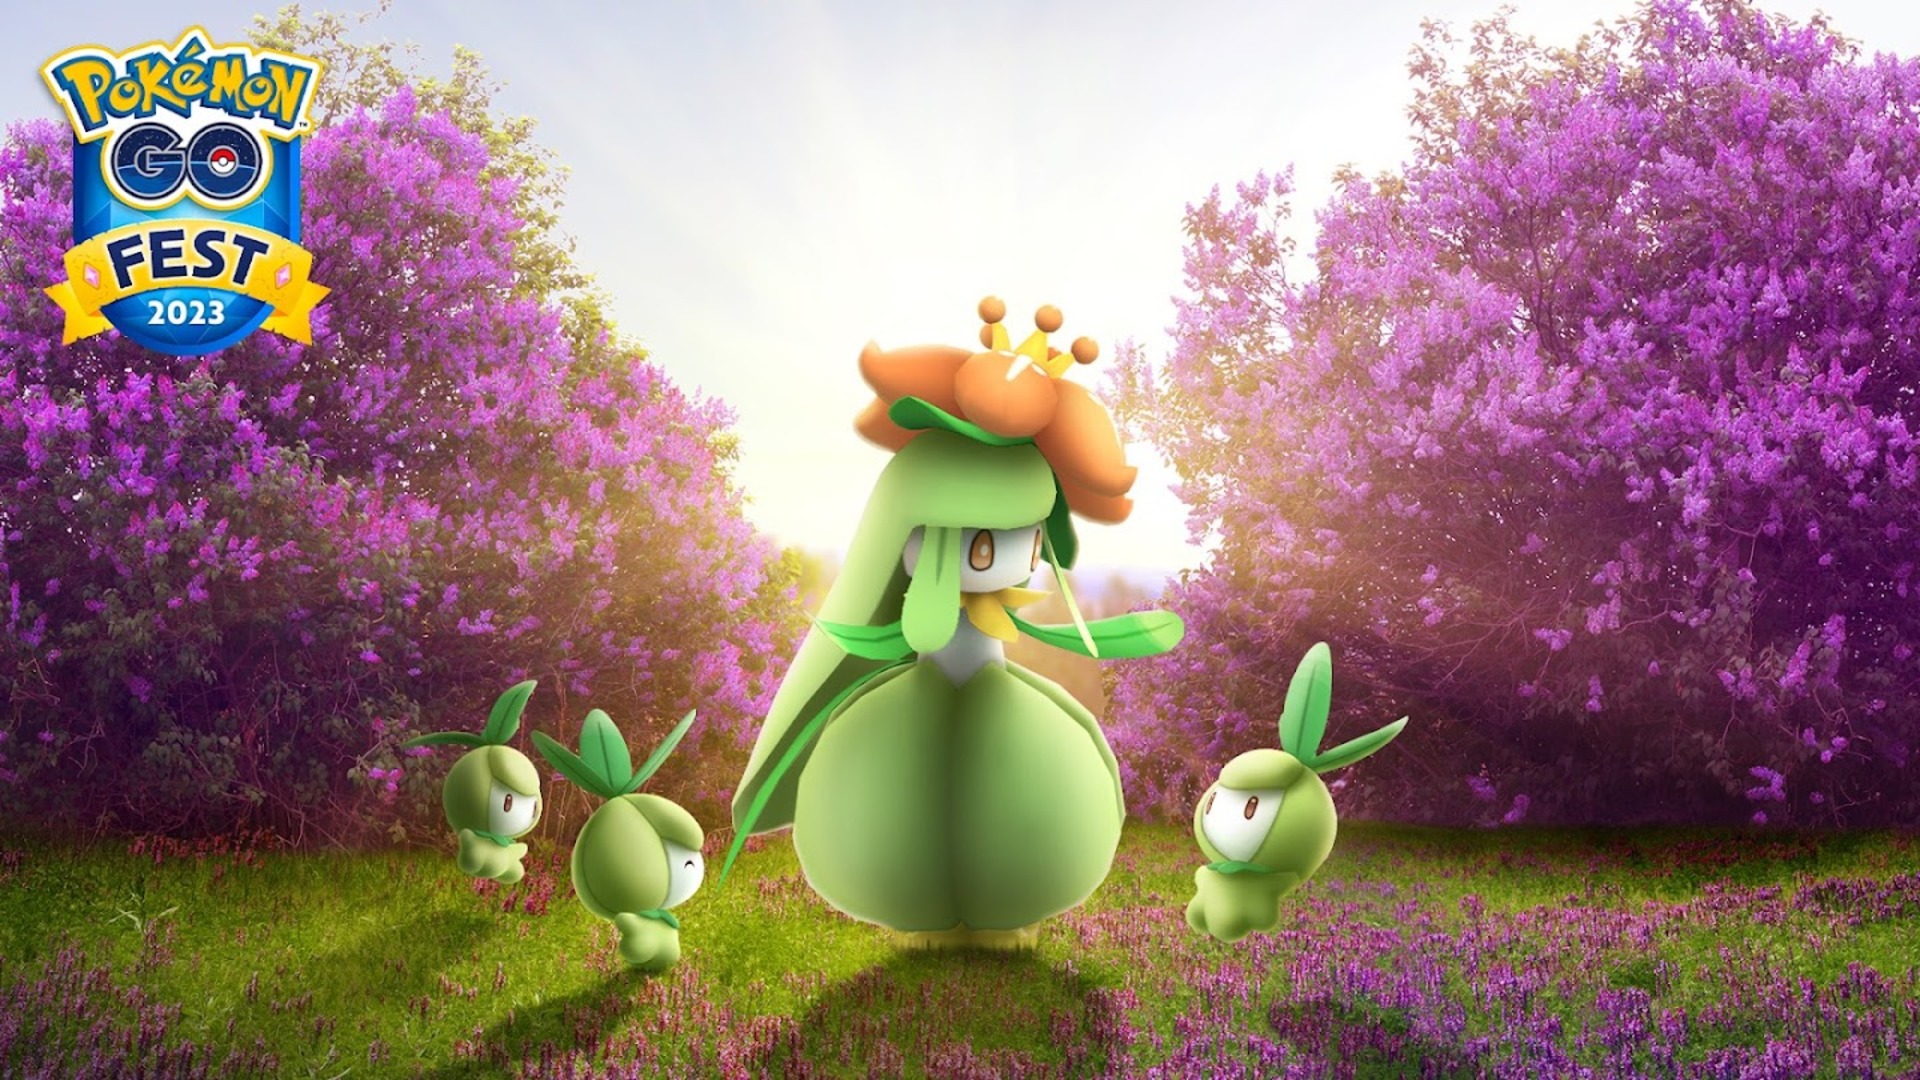 Look for Grass-type and Fairy-type Pokemon in the wild during the Glittering Garden event